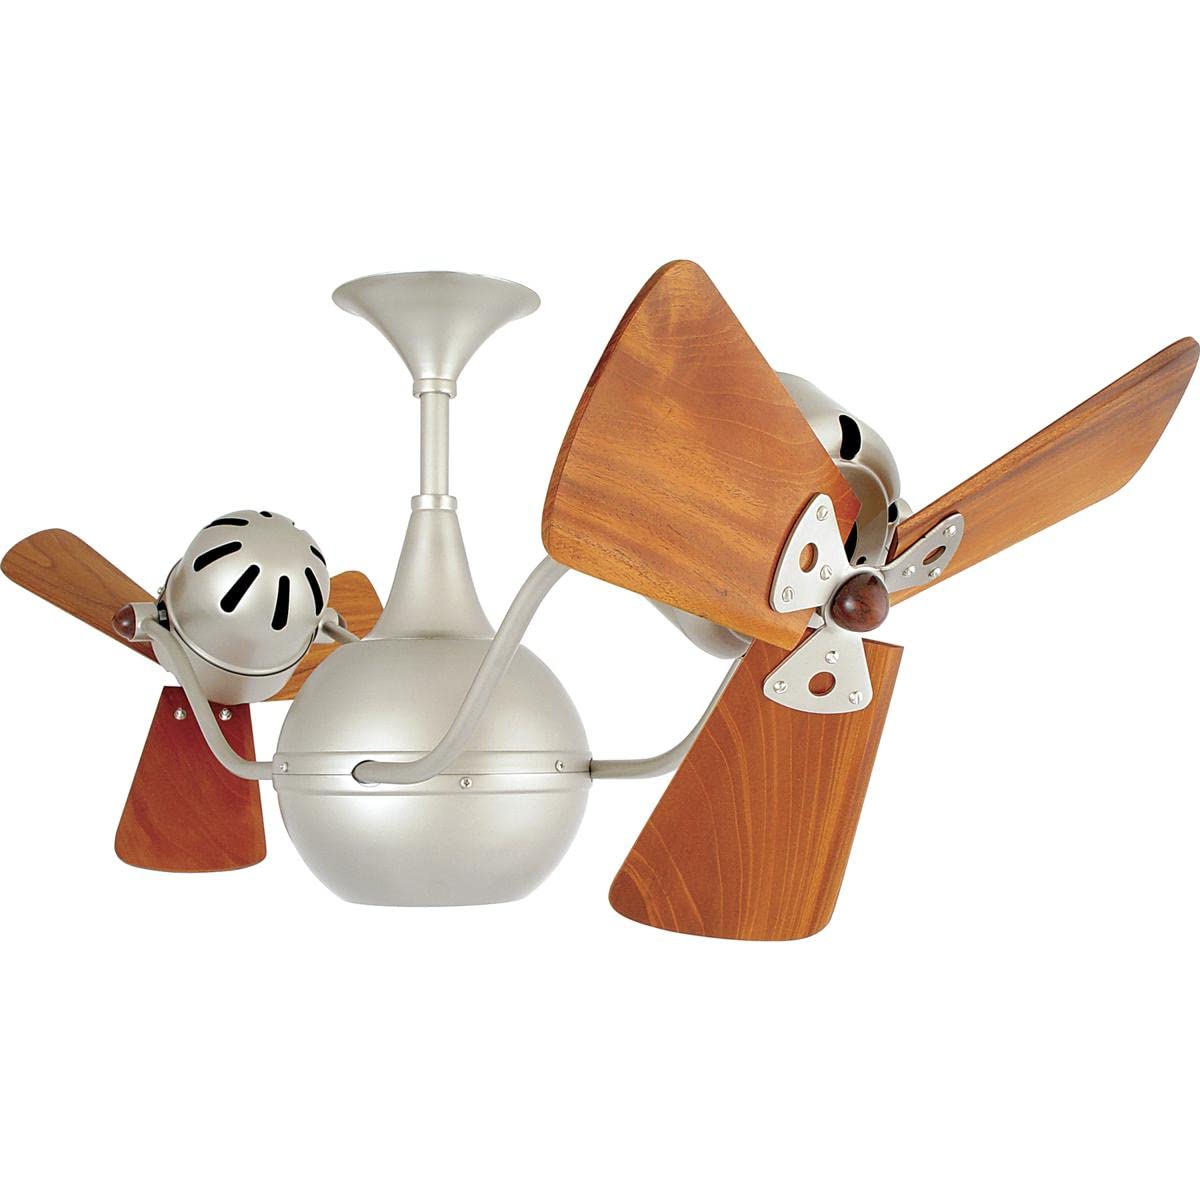 Matthews Fan VB-BN-WD Vent-Bettina 360° dual headed rotational ceiling fan in brushed nickel with solid sustainable mahogany wood blades.